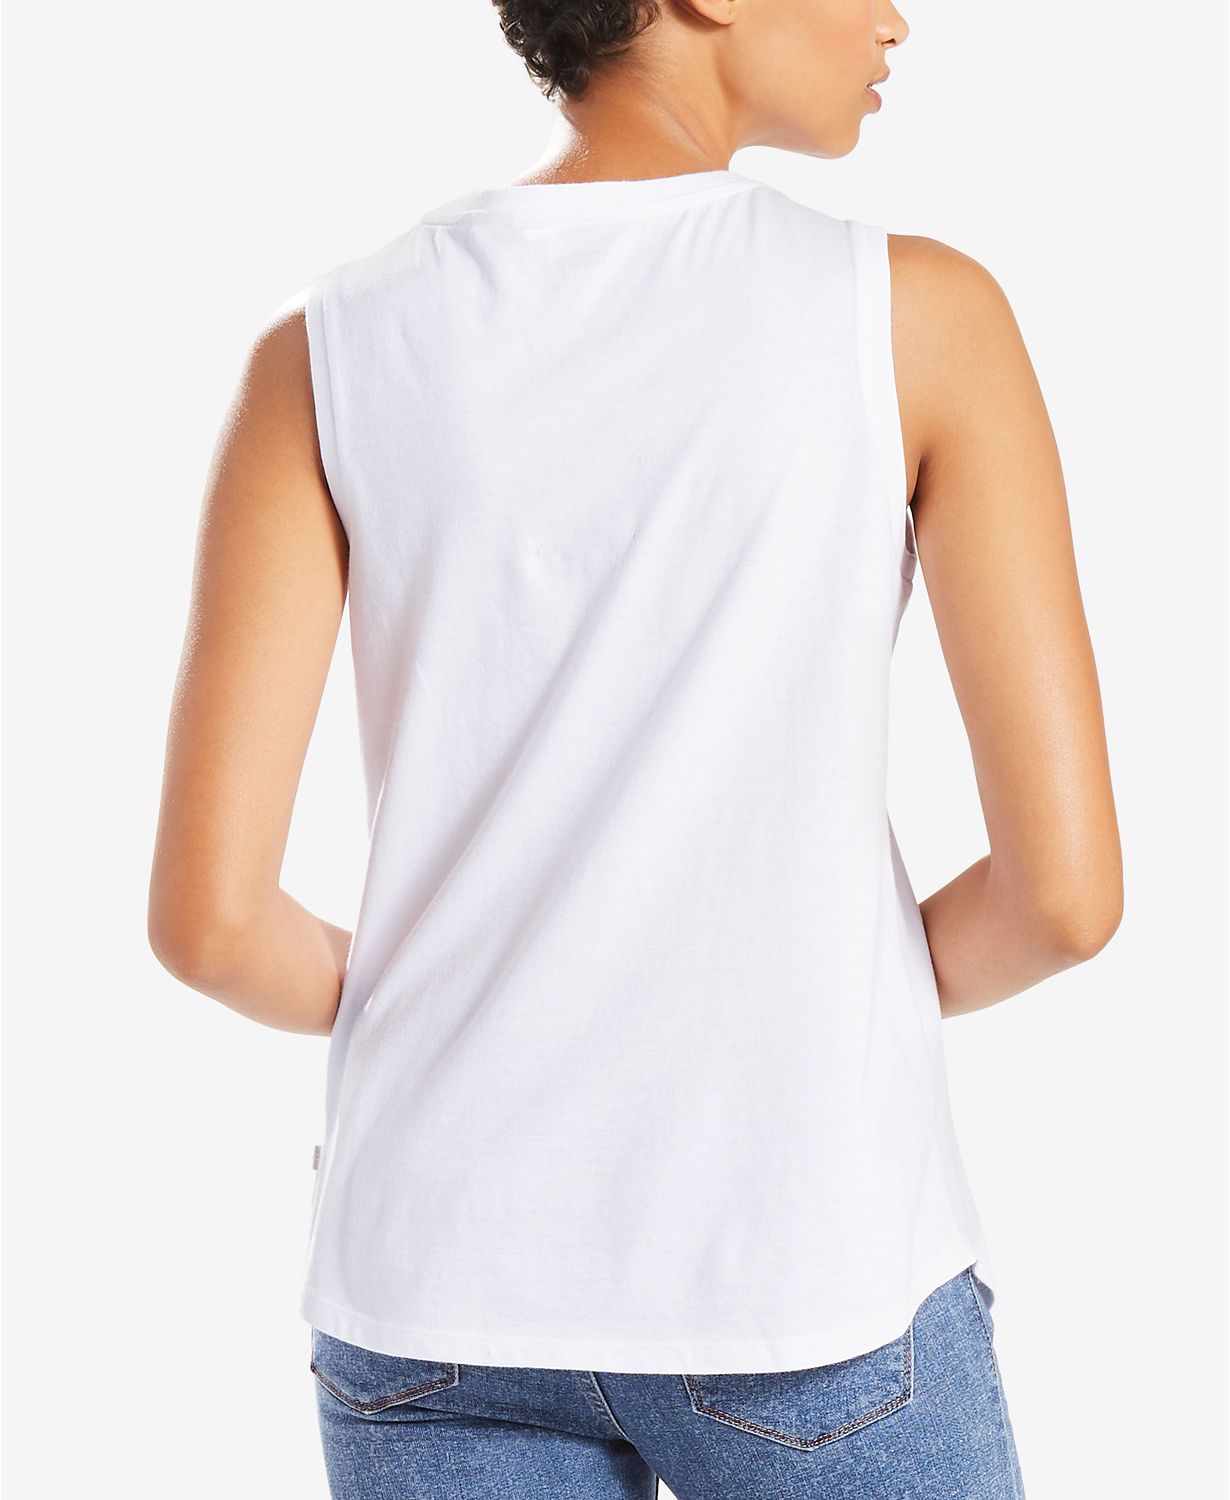 Levi's Womens Graphic Muscle Tank Top White Large